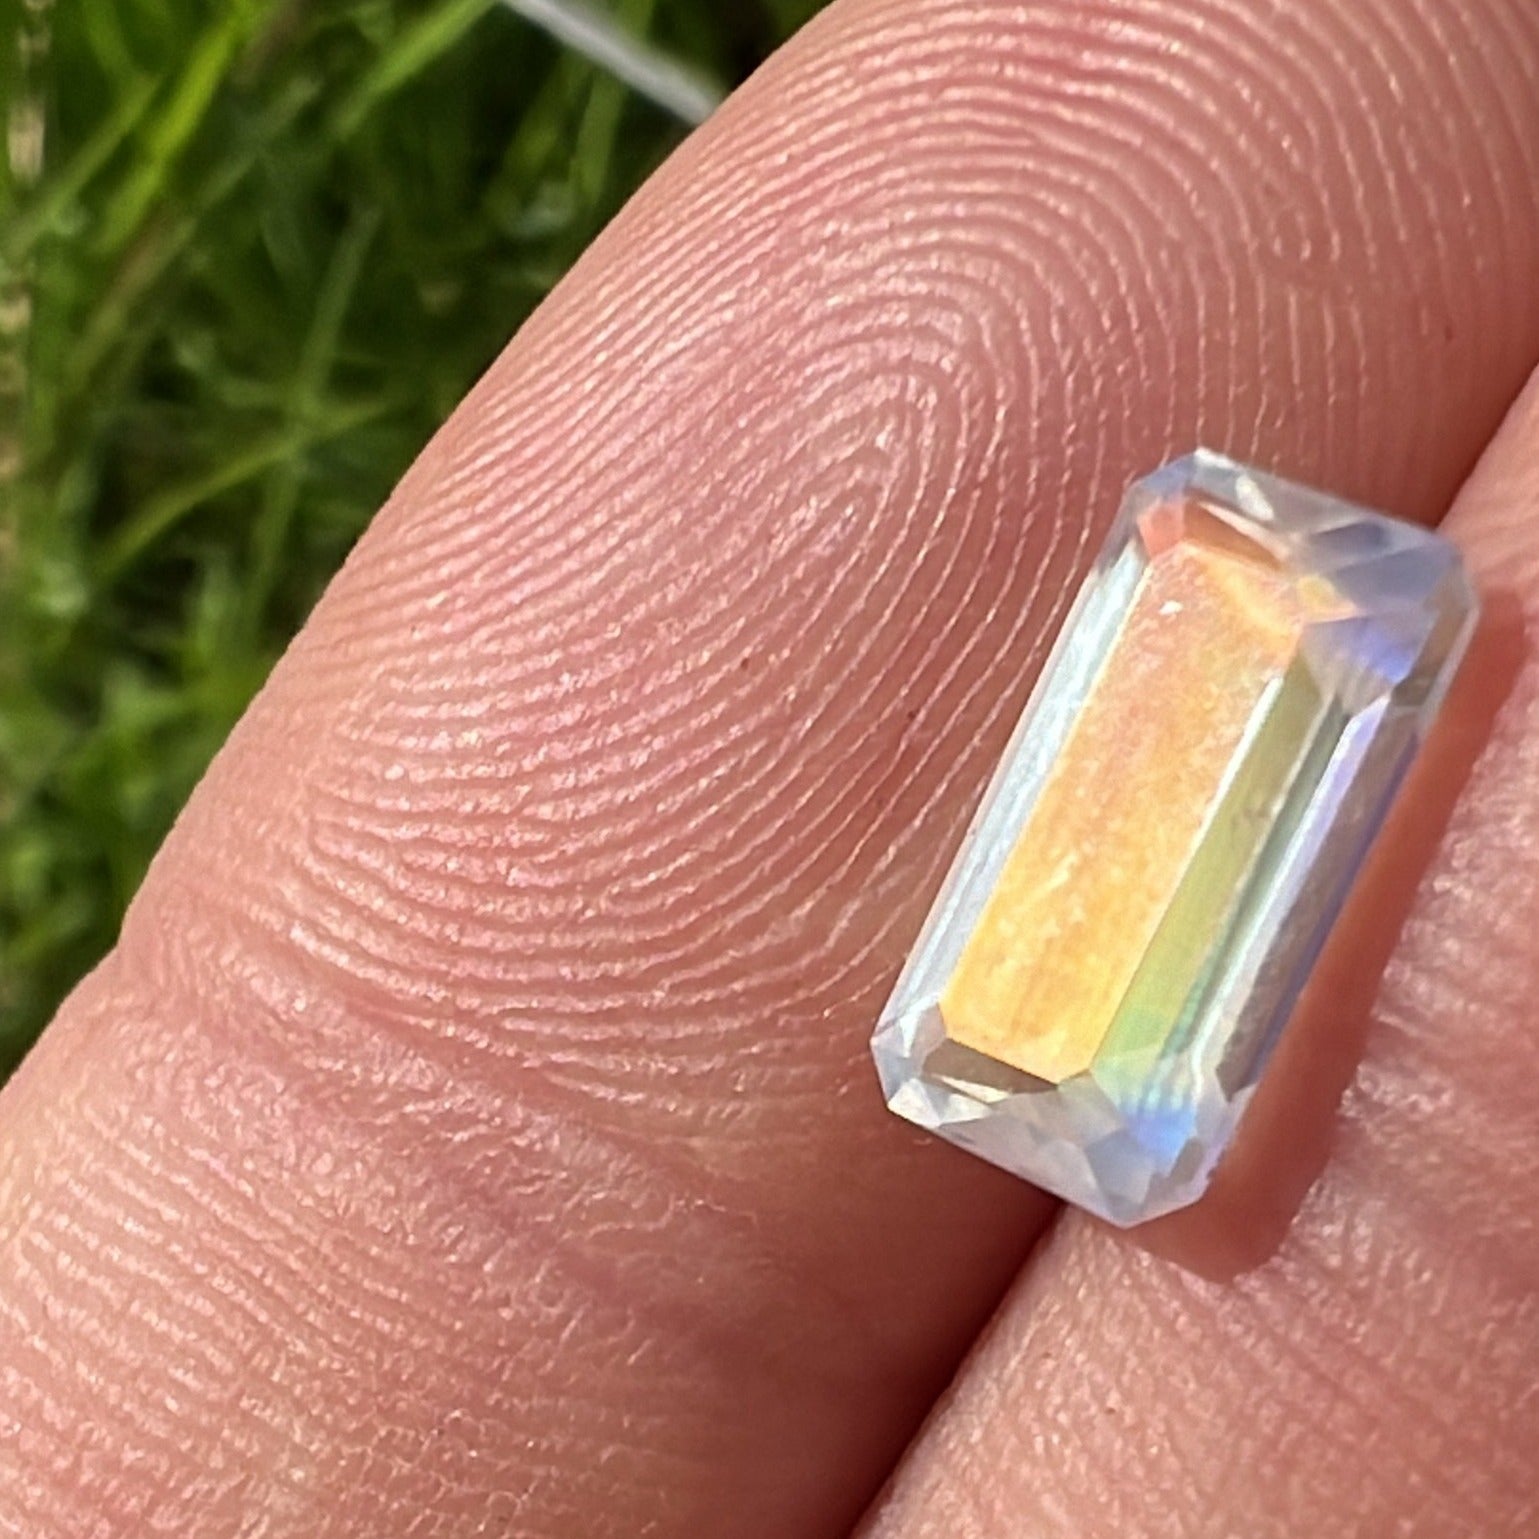 Rainbow moonstone showing some more green and blue along with the orange and yellow